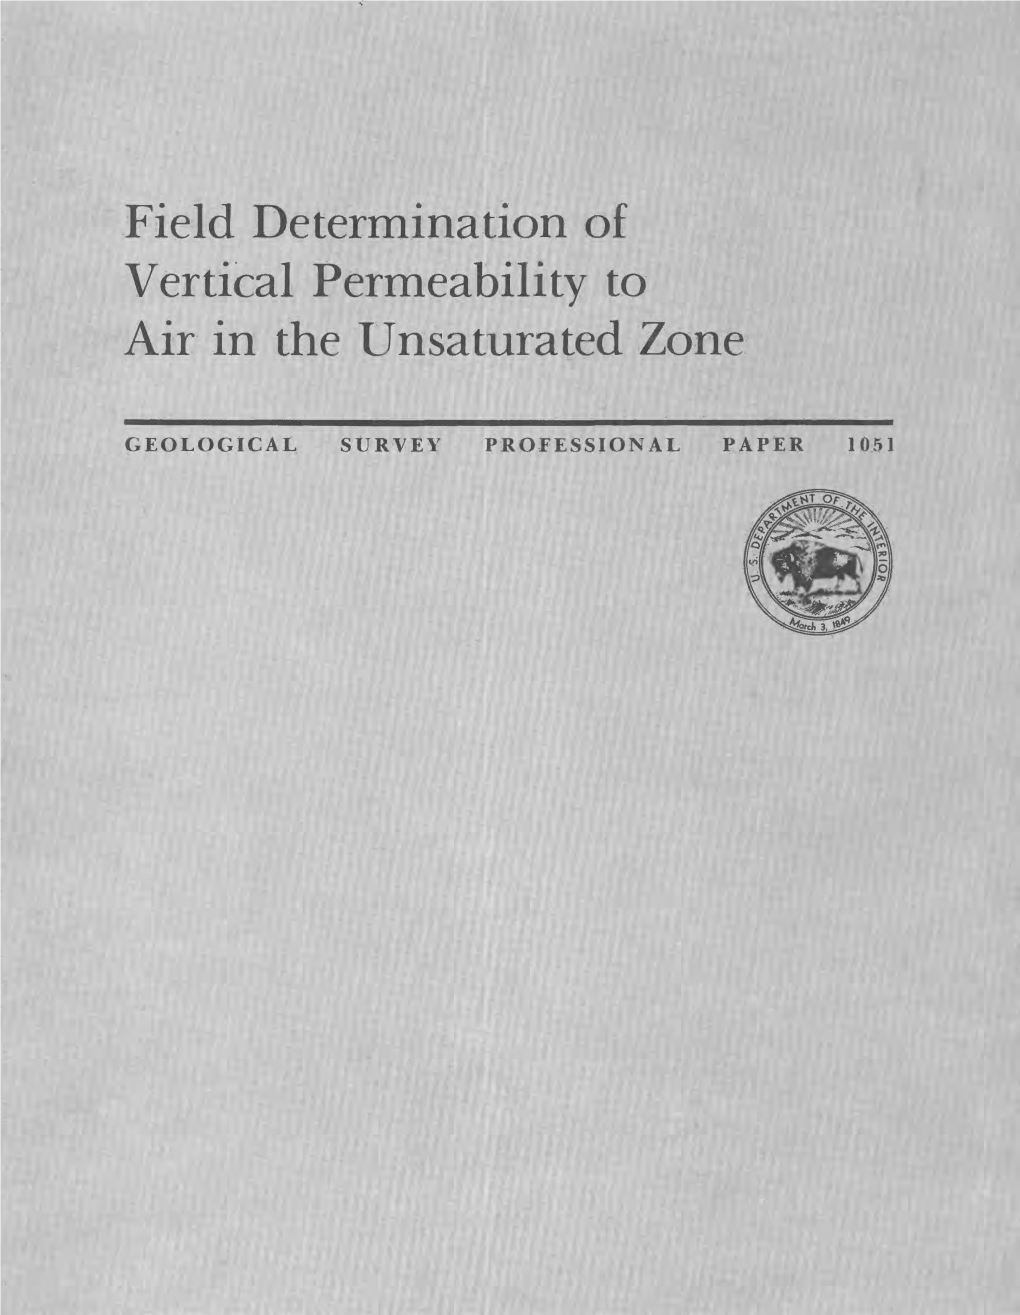 Field Determination of Vertical Permeability to Air in the Unsaturated Zone